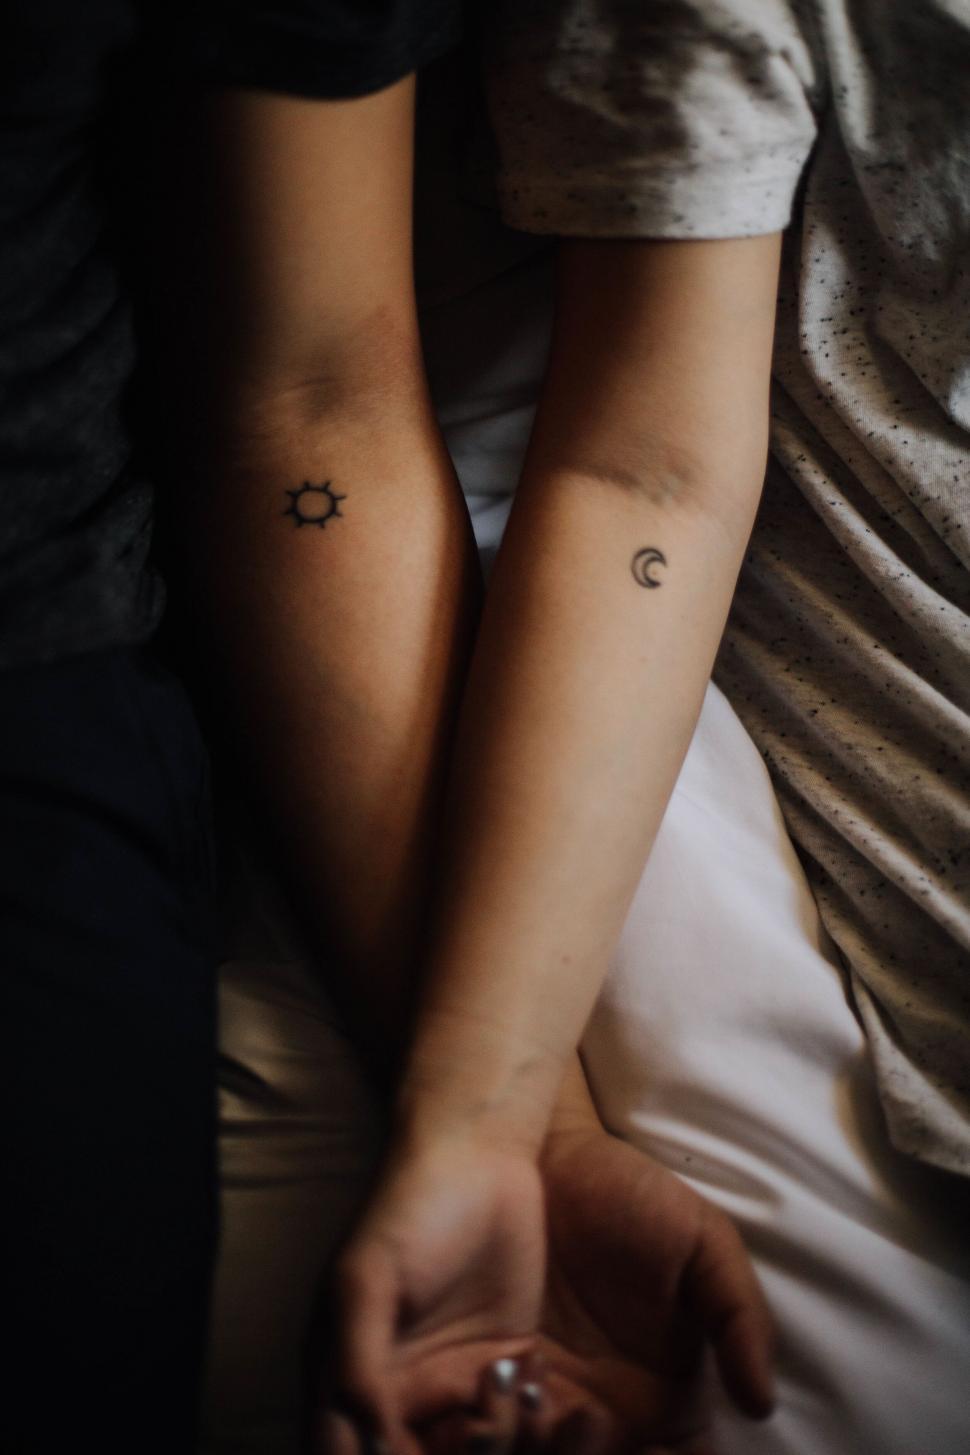 Free Image of Intimate tattooed arms holding each other 